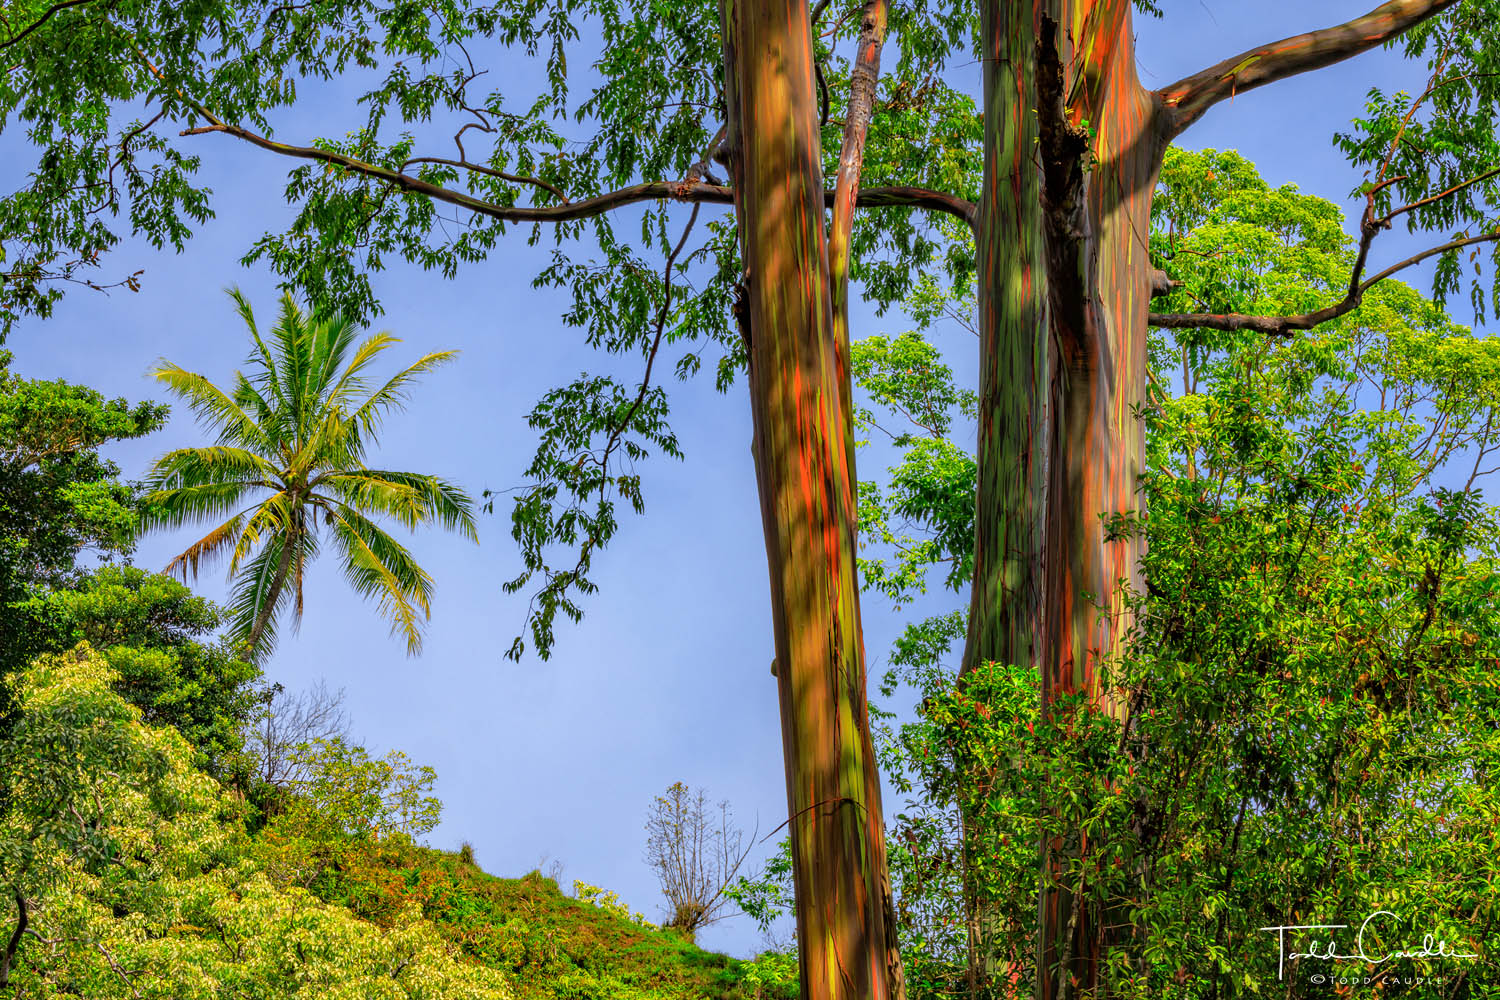 The rainbow eucalyptus tree is so named due to the varied coloration of its bark.